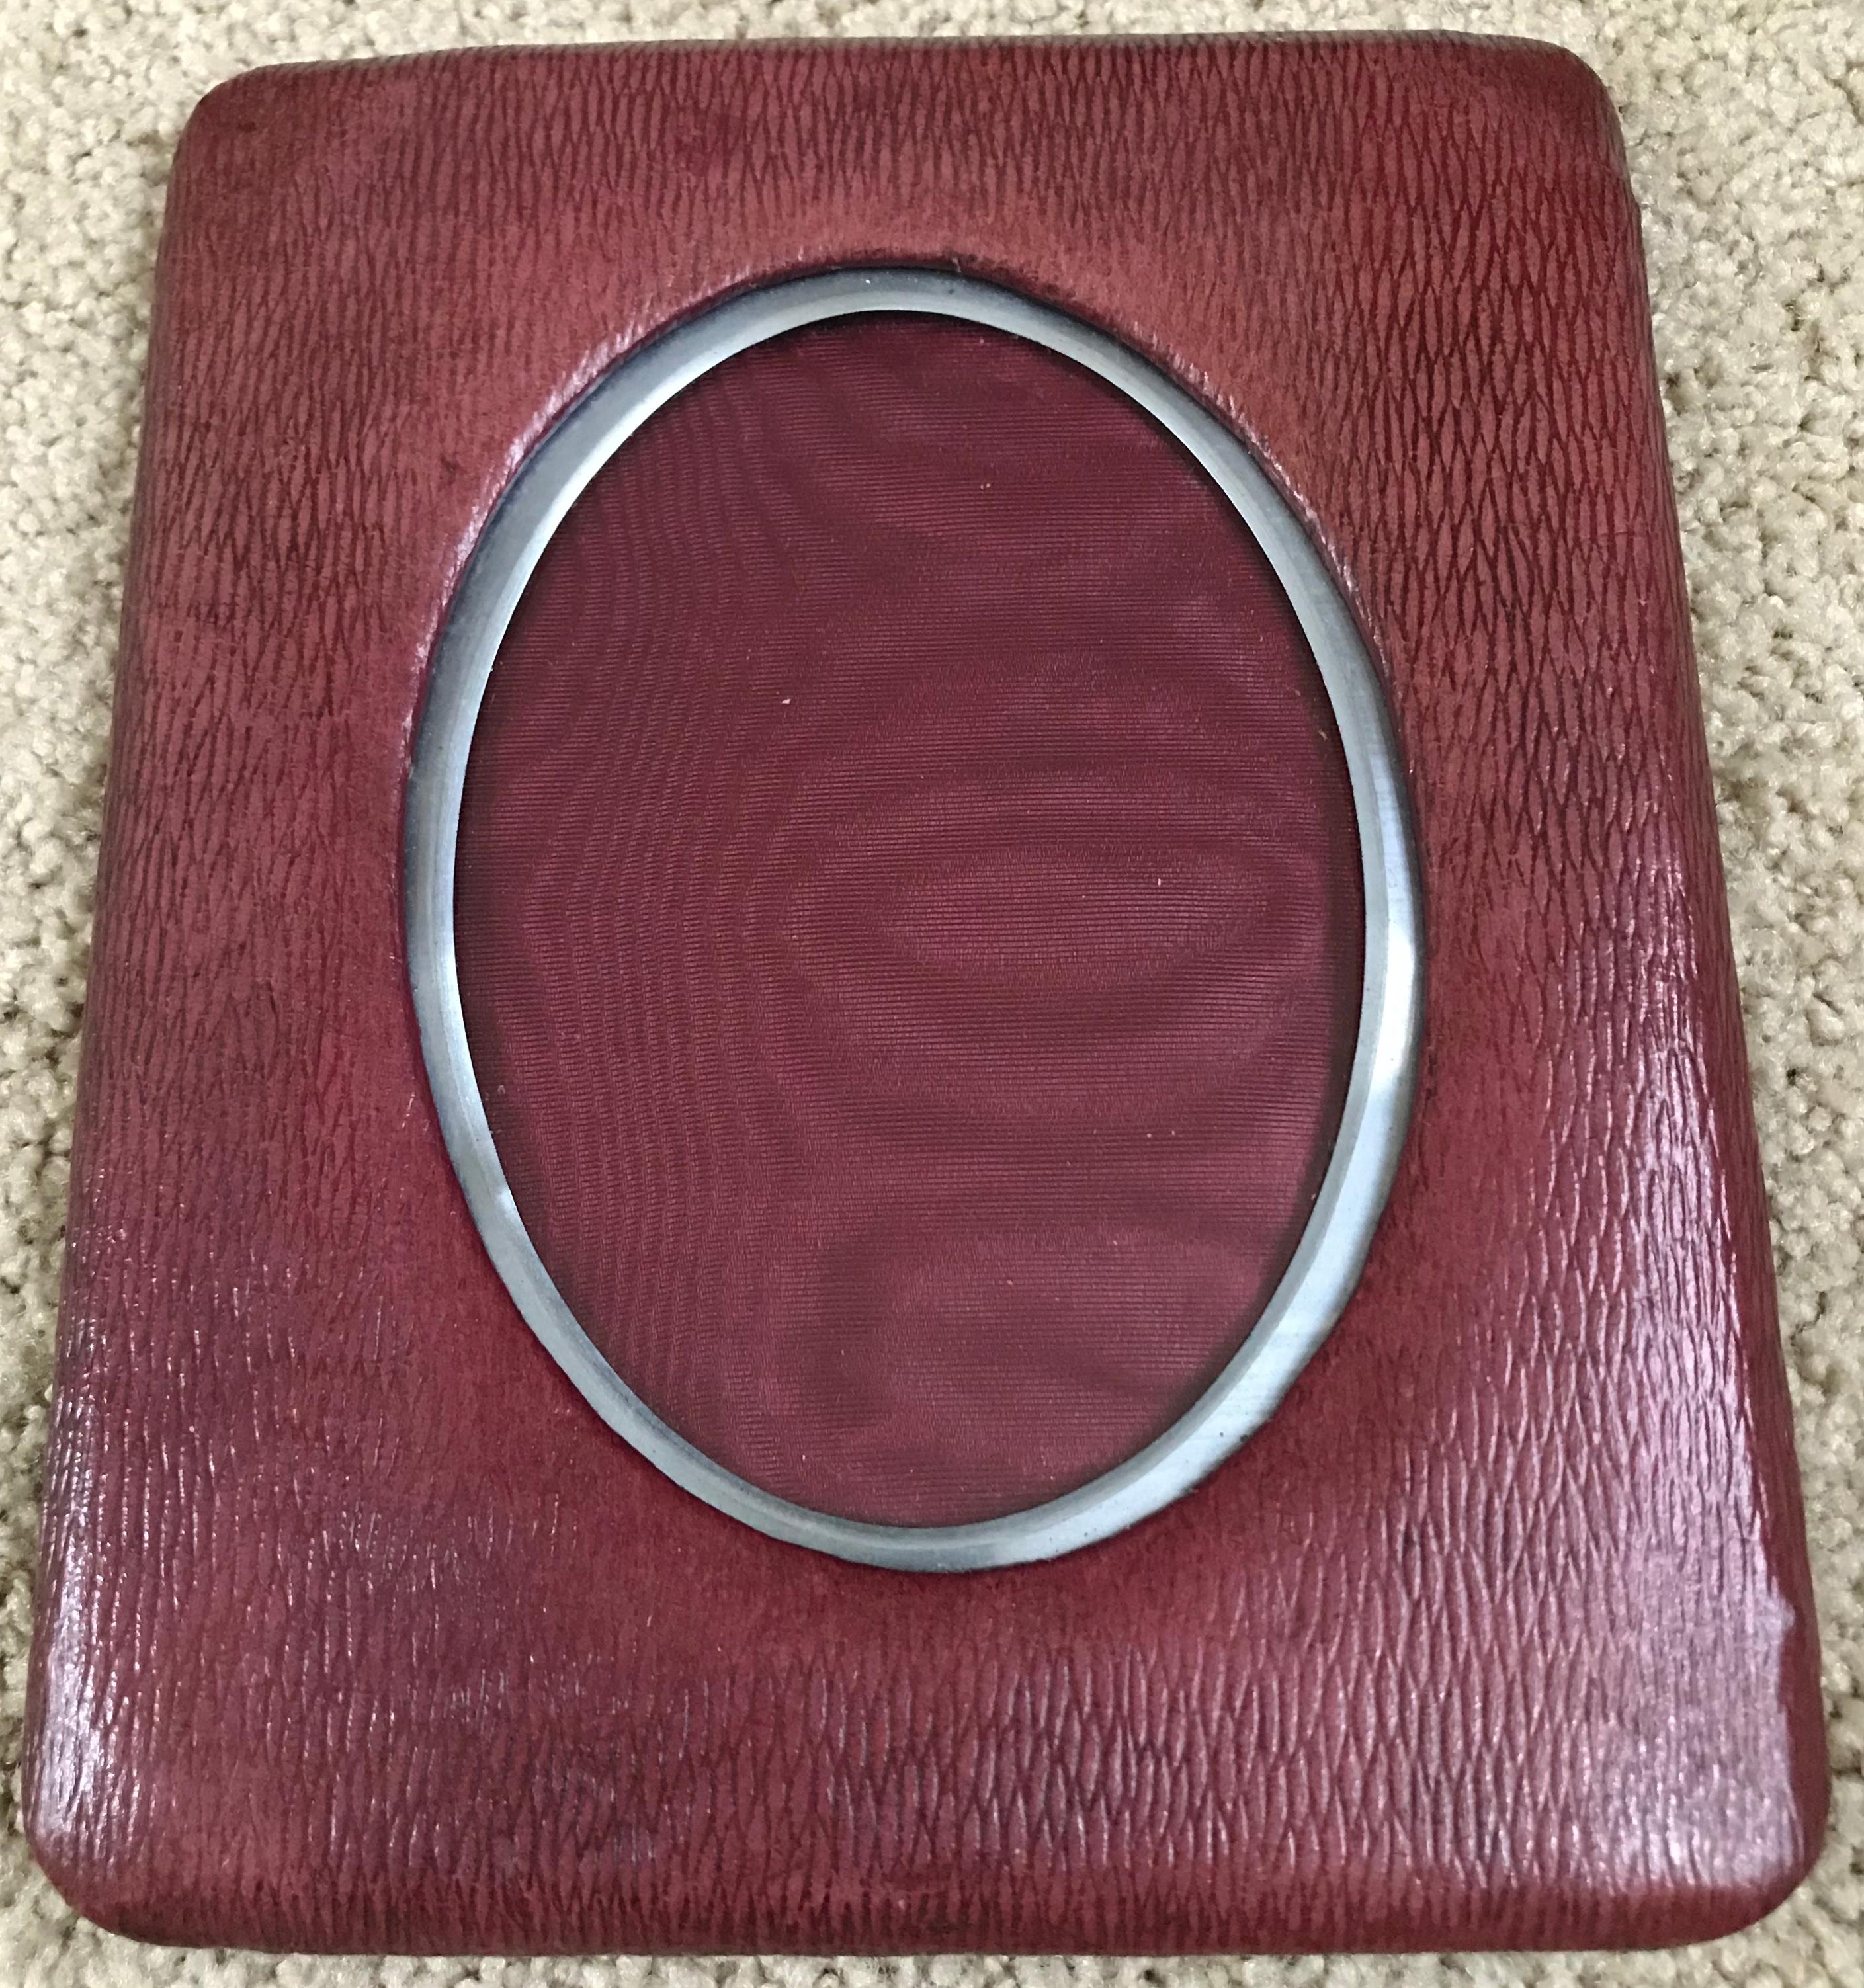 Burgundy leather and steel oval frame. Vintage English leather easel frame in rich Bordeaux burgundy textured leather with steel oval trimmed matting and black easel backing. Father's day gift, England, circa 1925.
Dimensions: 8” H x 6.5” W x 4.25”